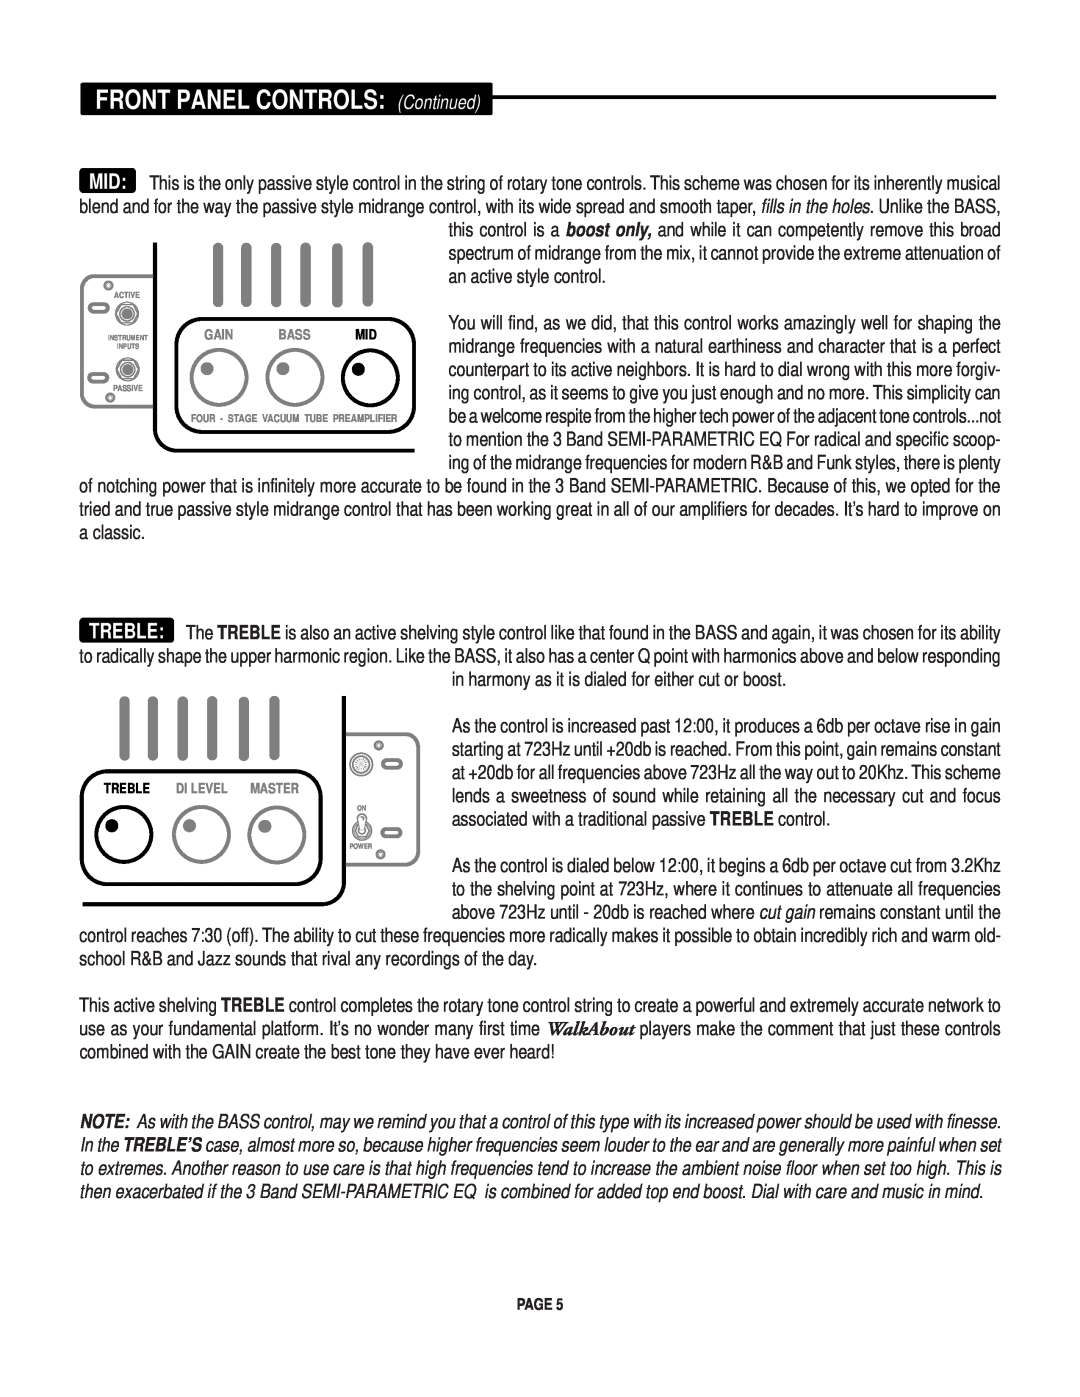 Mesa/Boogie Walk About Bass Amplifier owner manual Gain Bass Mid, Treble, Di Level Master 